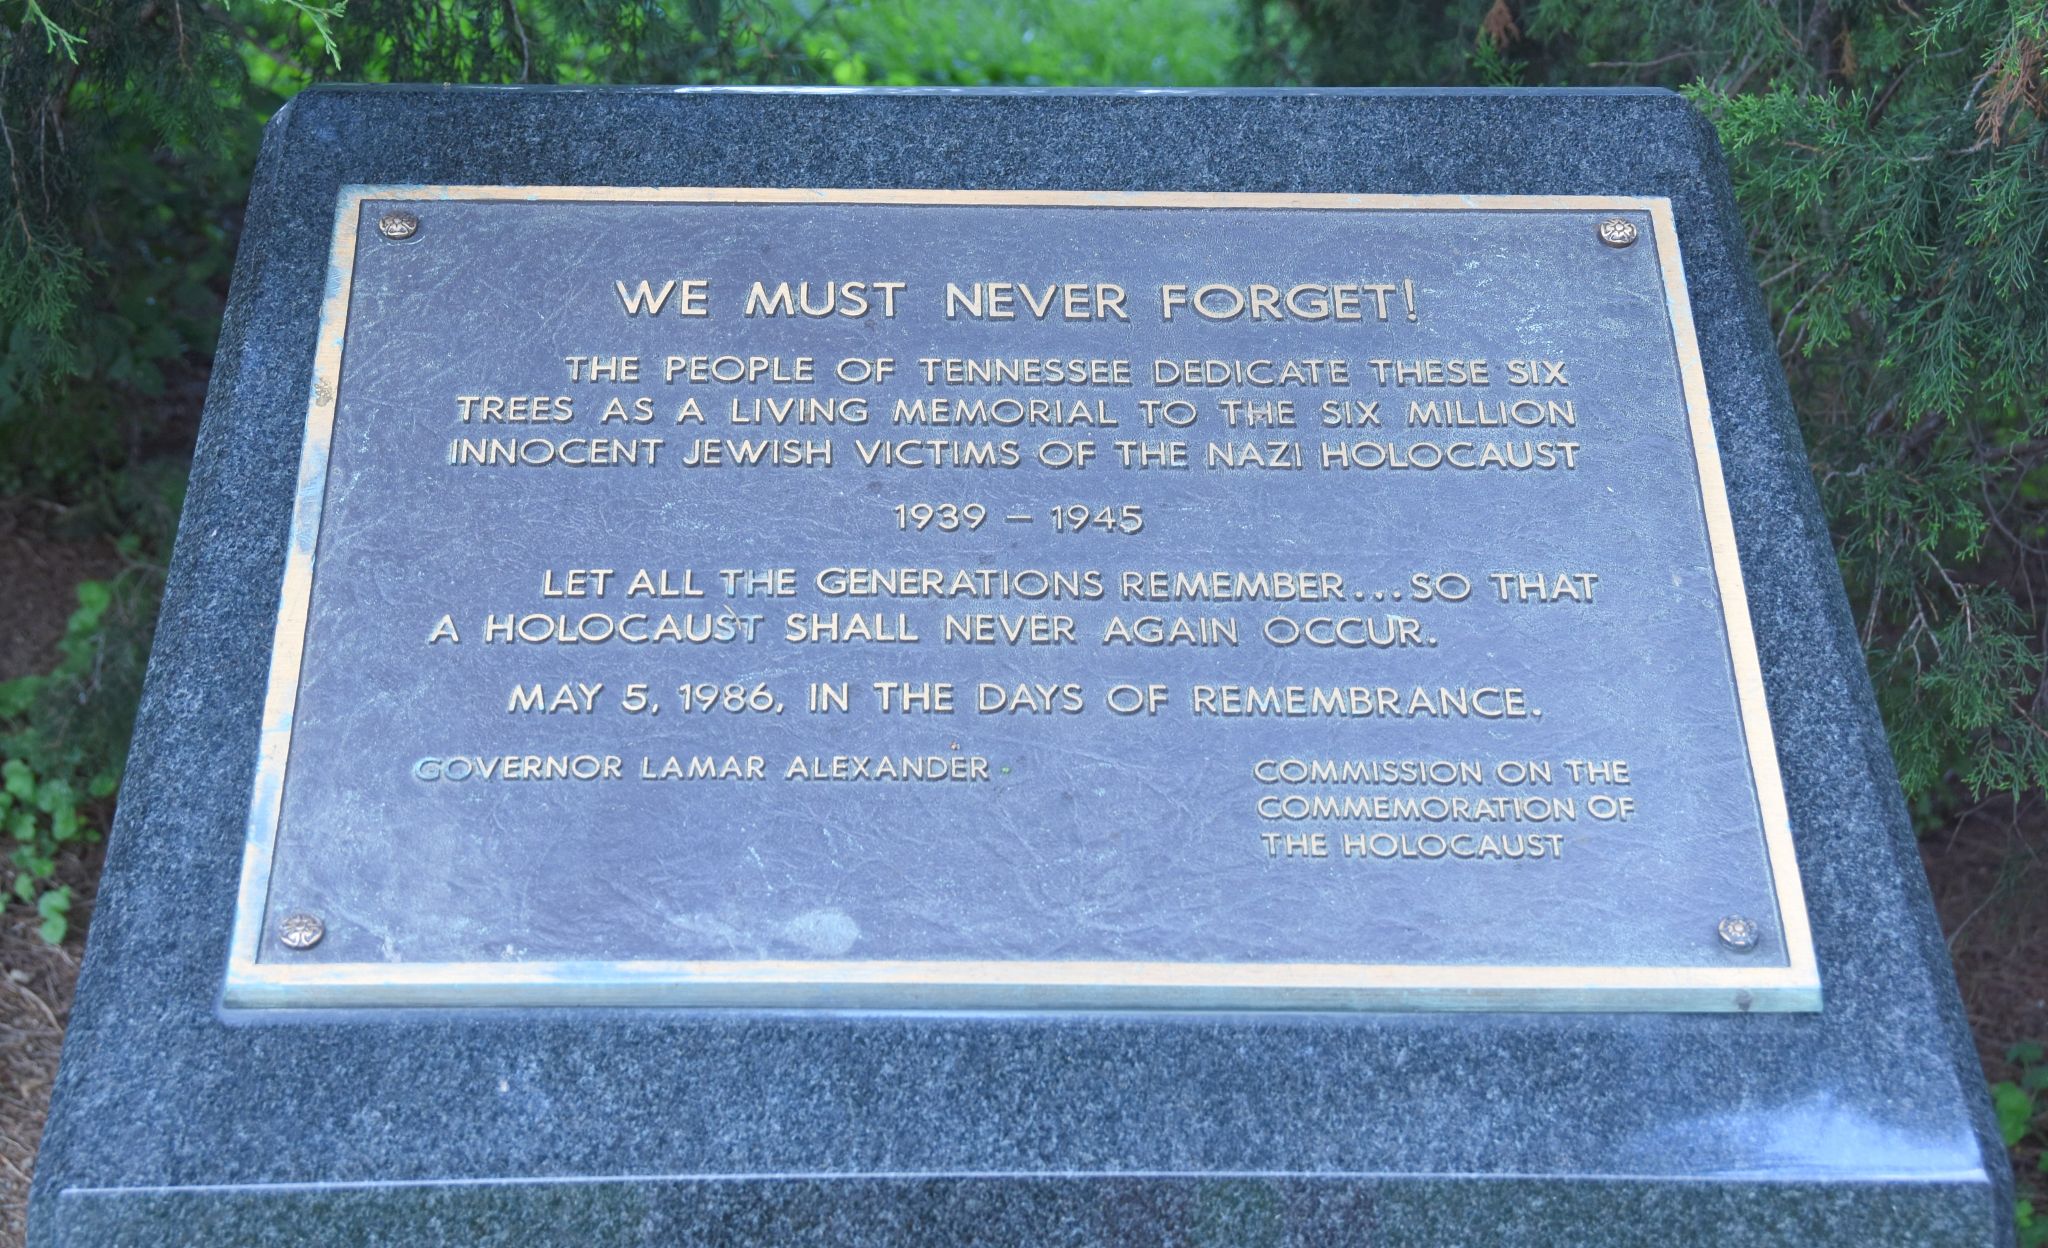 Tennessee State Capitol Grounds (Holocaust Memorial), Nashville, TN - 2016-09-01